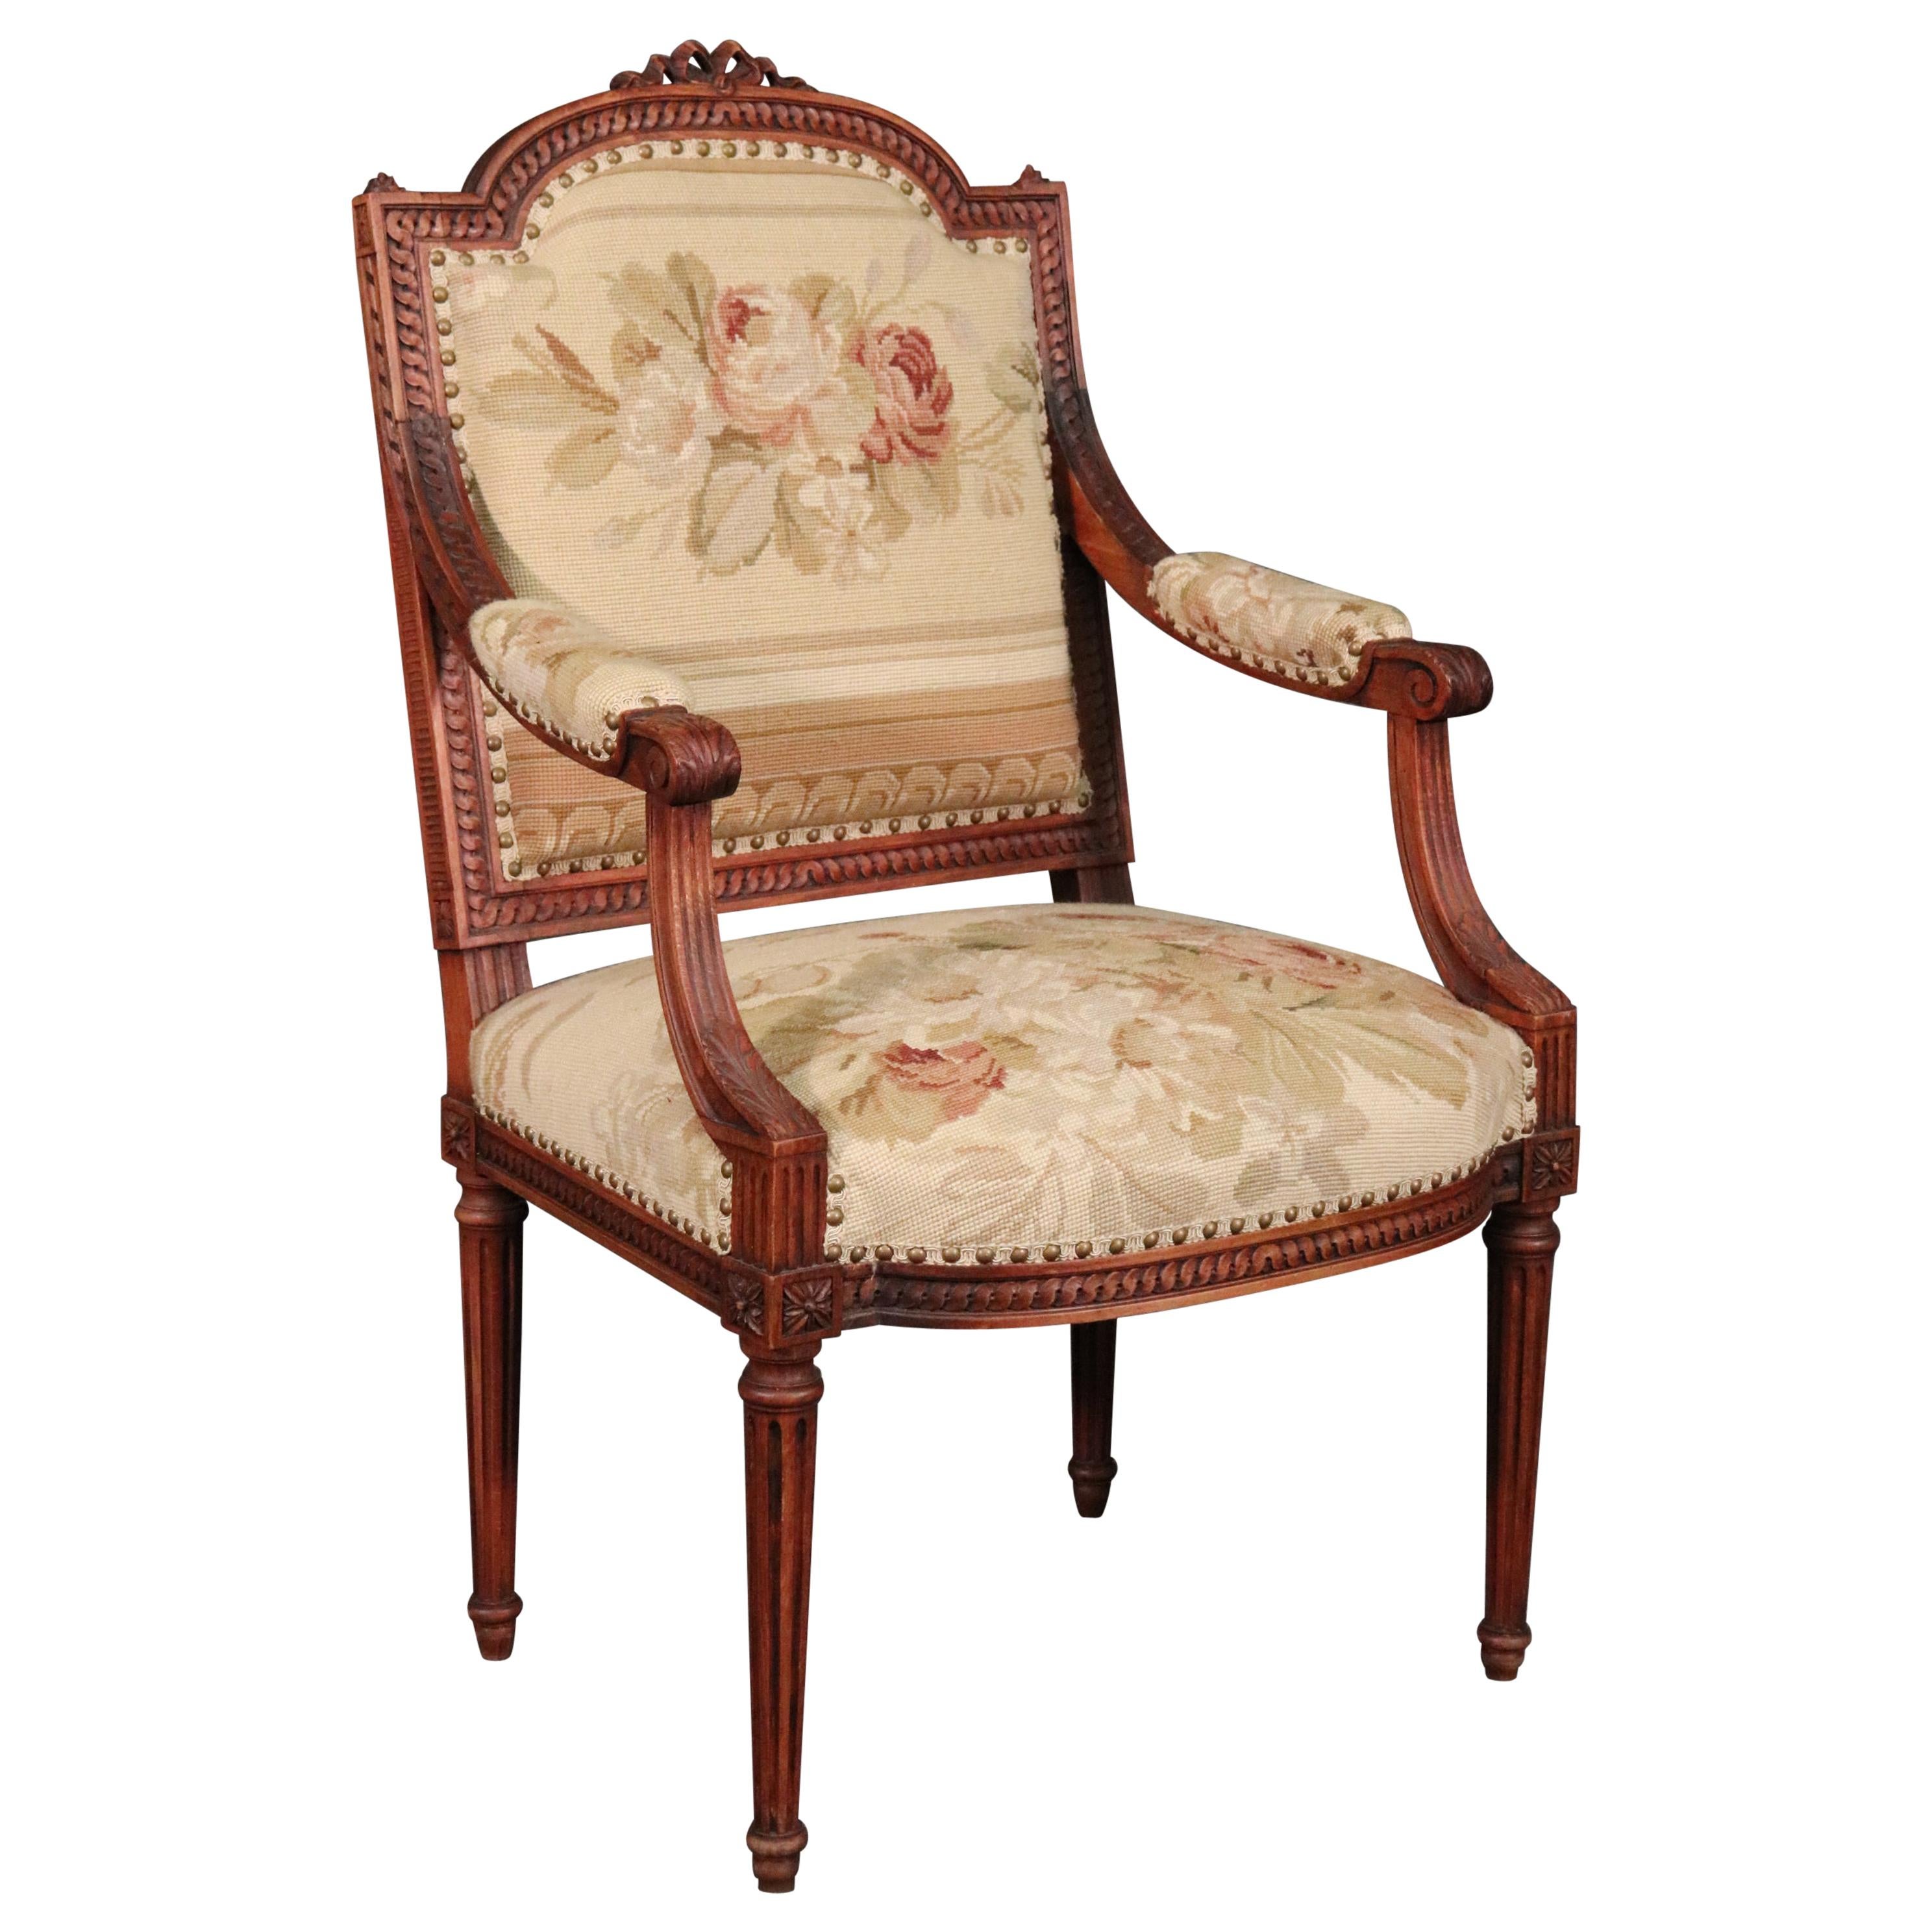 French Louis XVI Needlepoint Fauteuil Armchair in Walnut, circa 1890